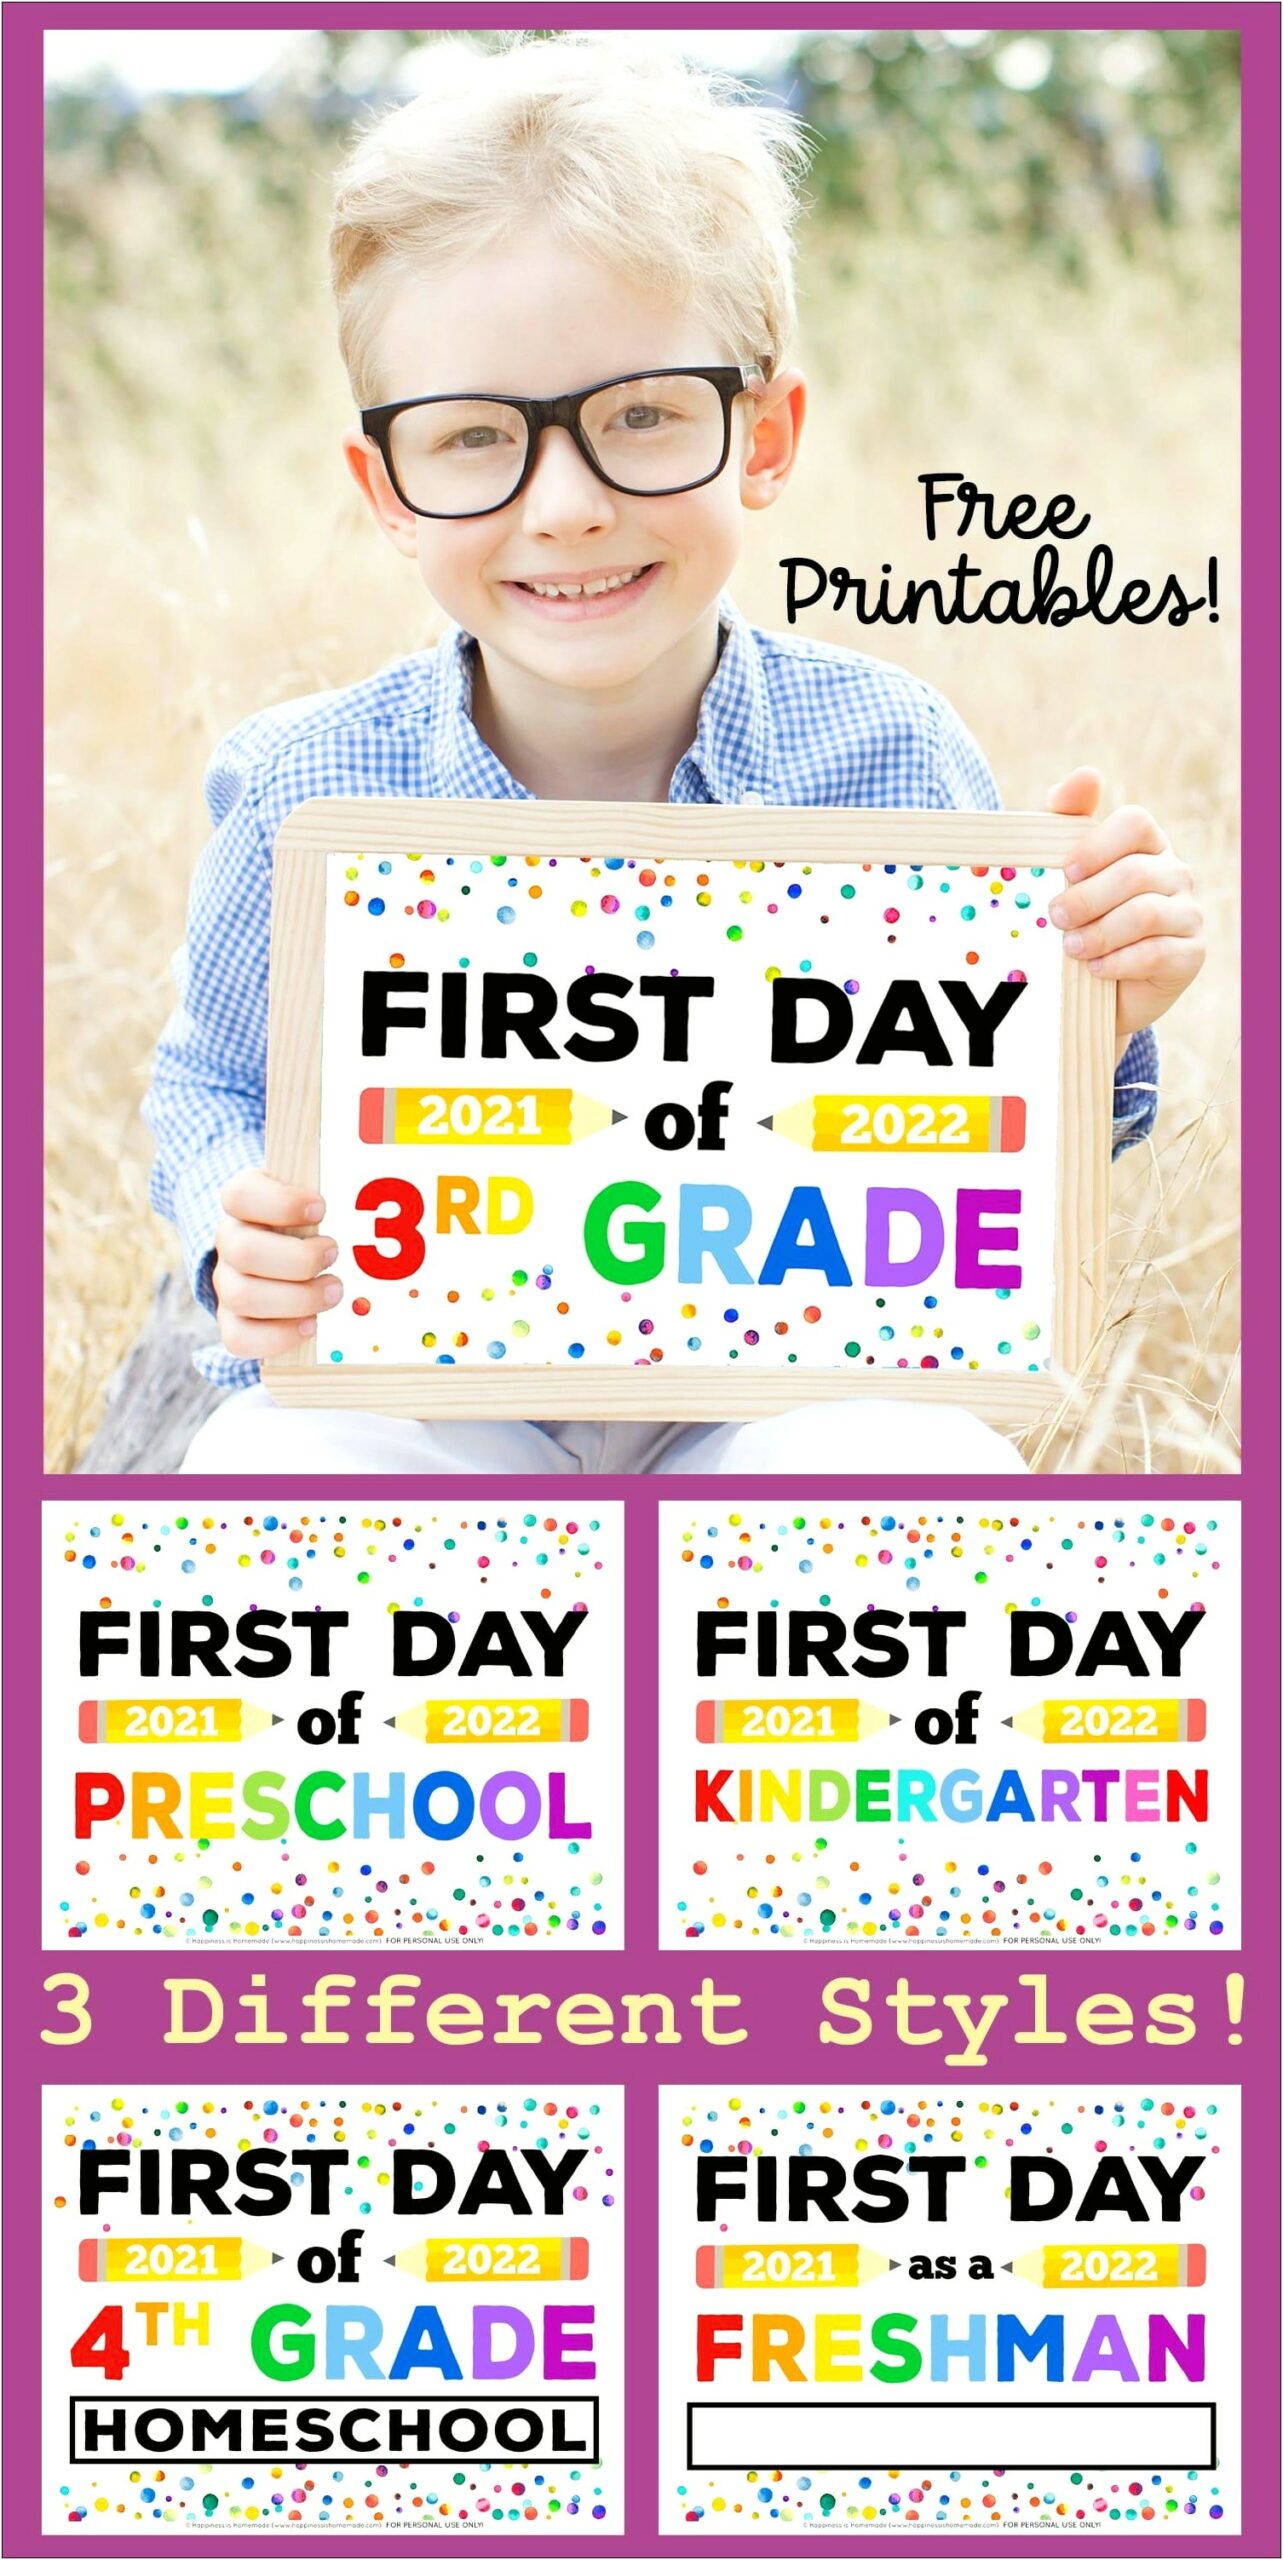 Free Printable Template For 1st Day Preschool Sign